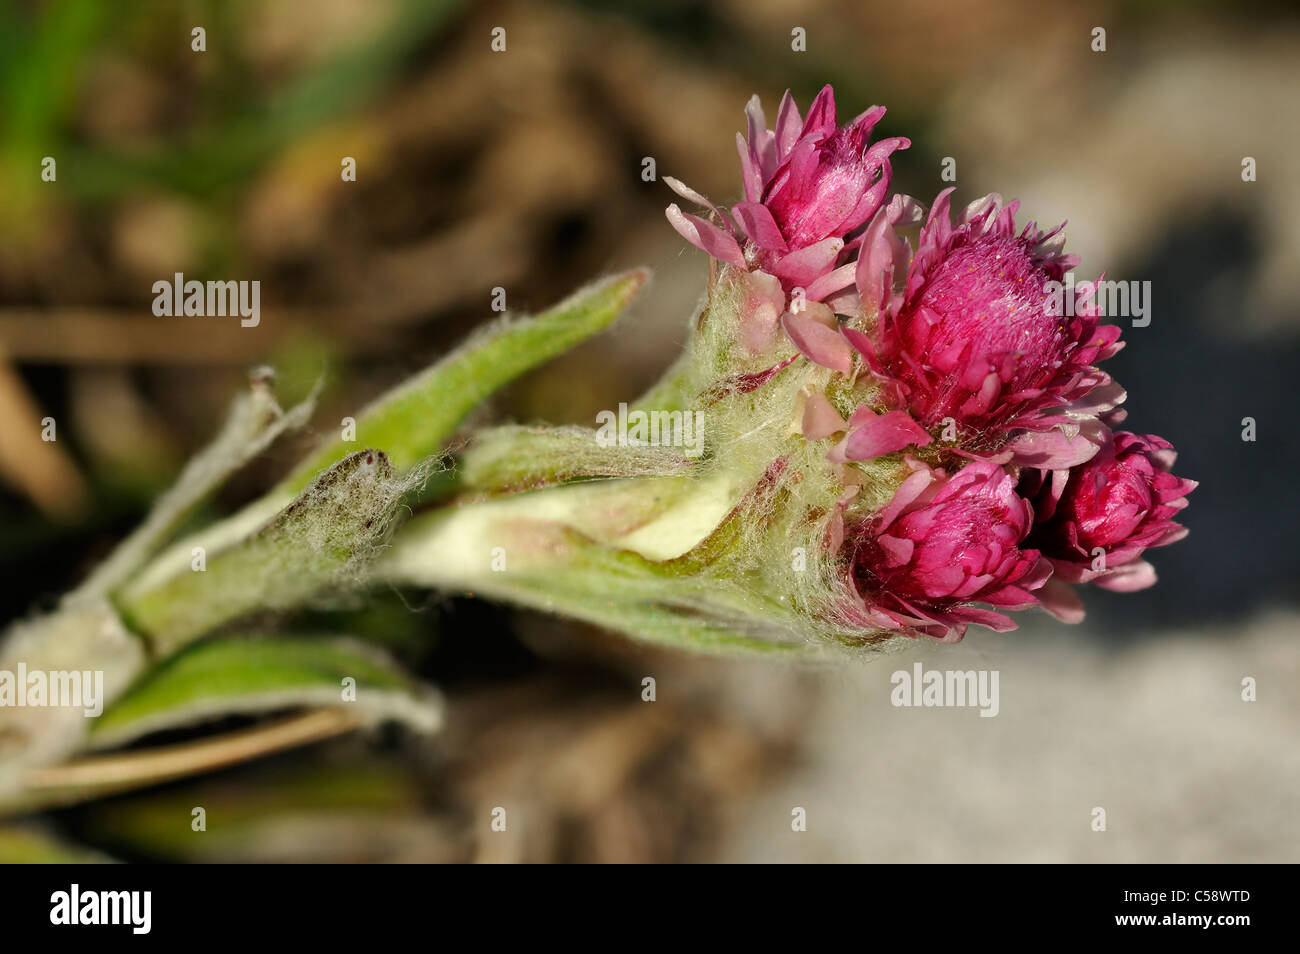 Mountain Everlasting or Cat's Foot - Antennaria dioica growing on the Burren, Ireland Stock Photo